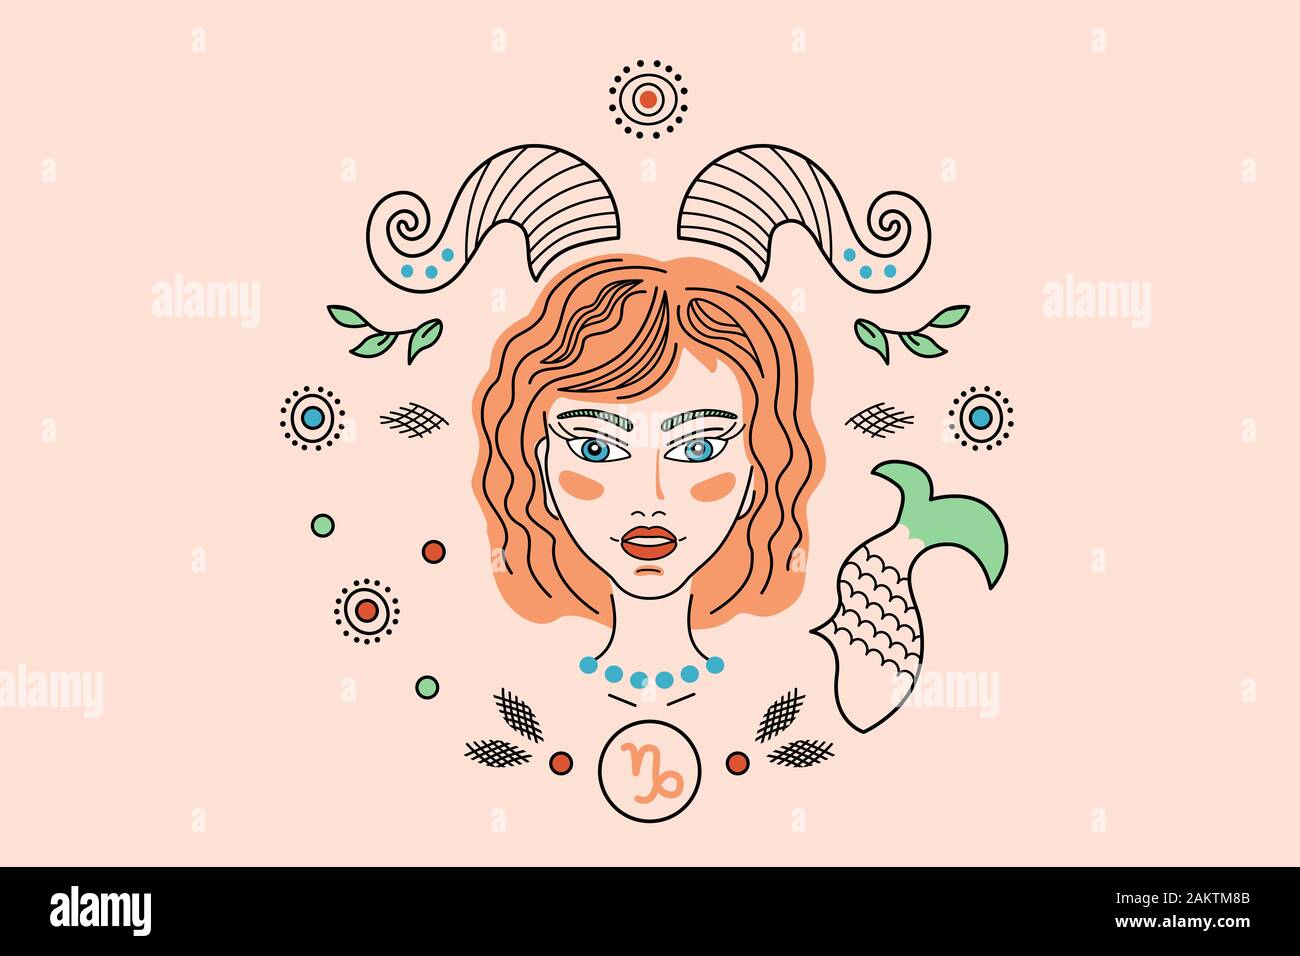 Illustration of zodiac signs constellations Capricorn, logo, tattoo. Girl or woman with horns and a fish tail, fantasy ornament in fairy tail style. Stock Photo